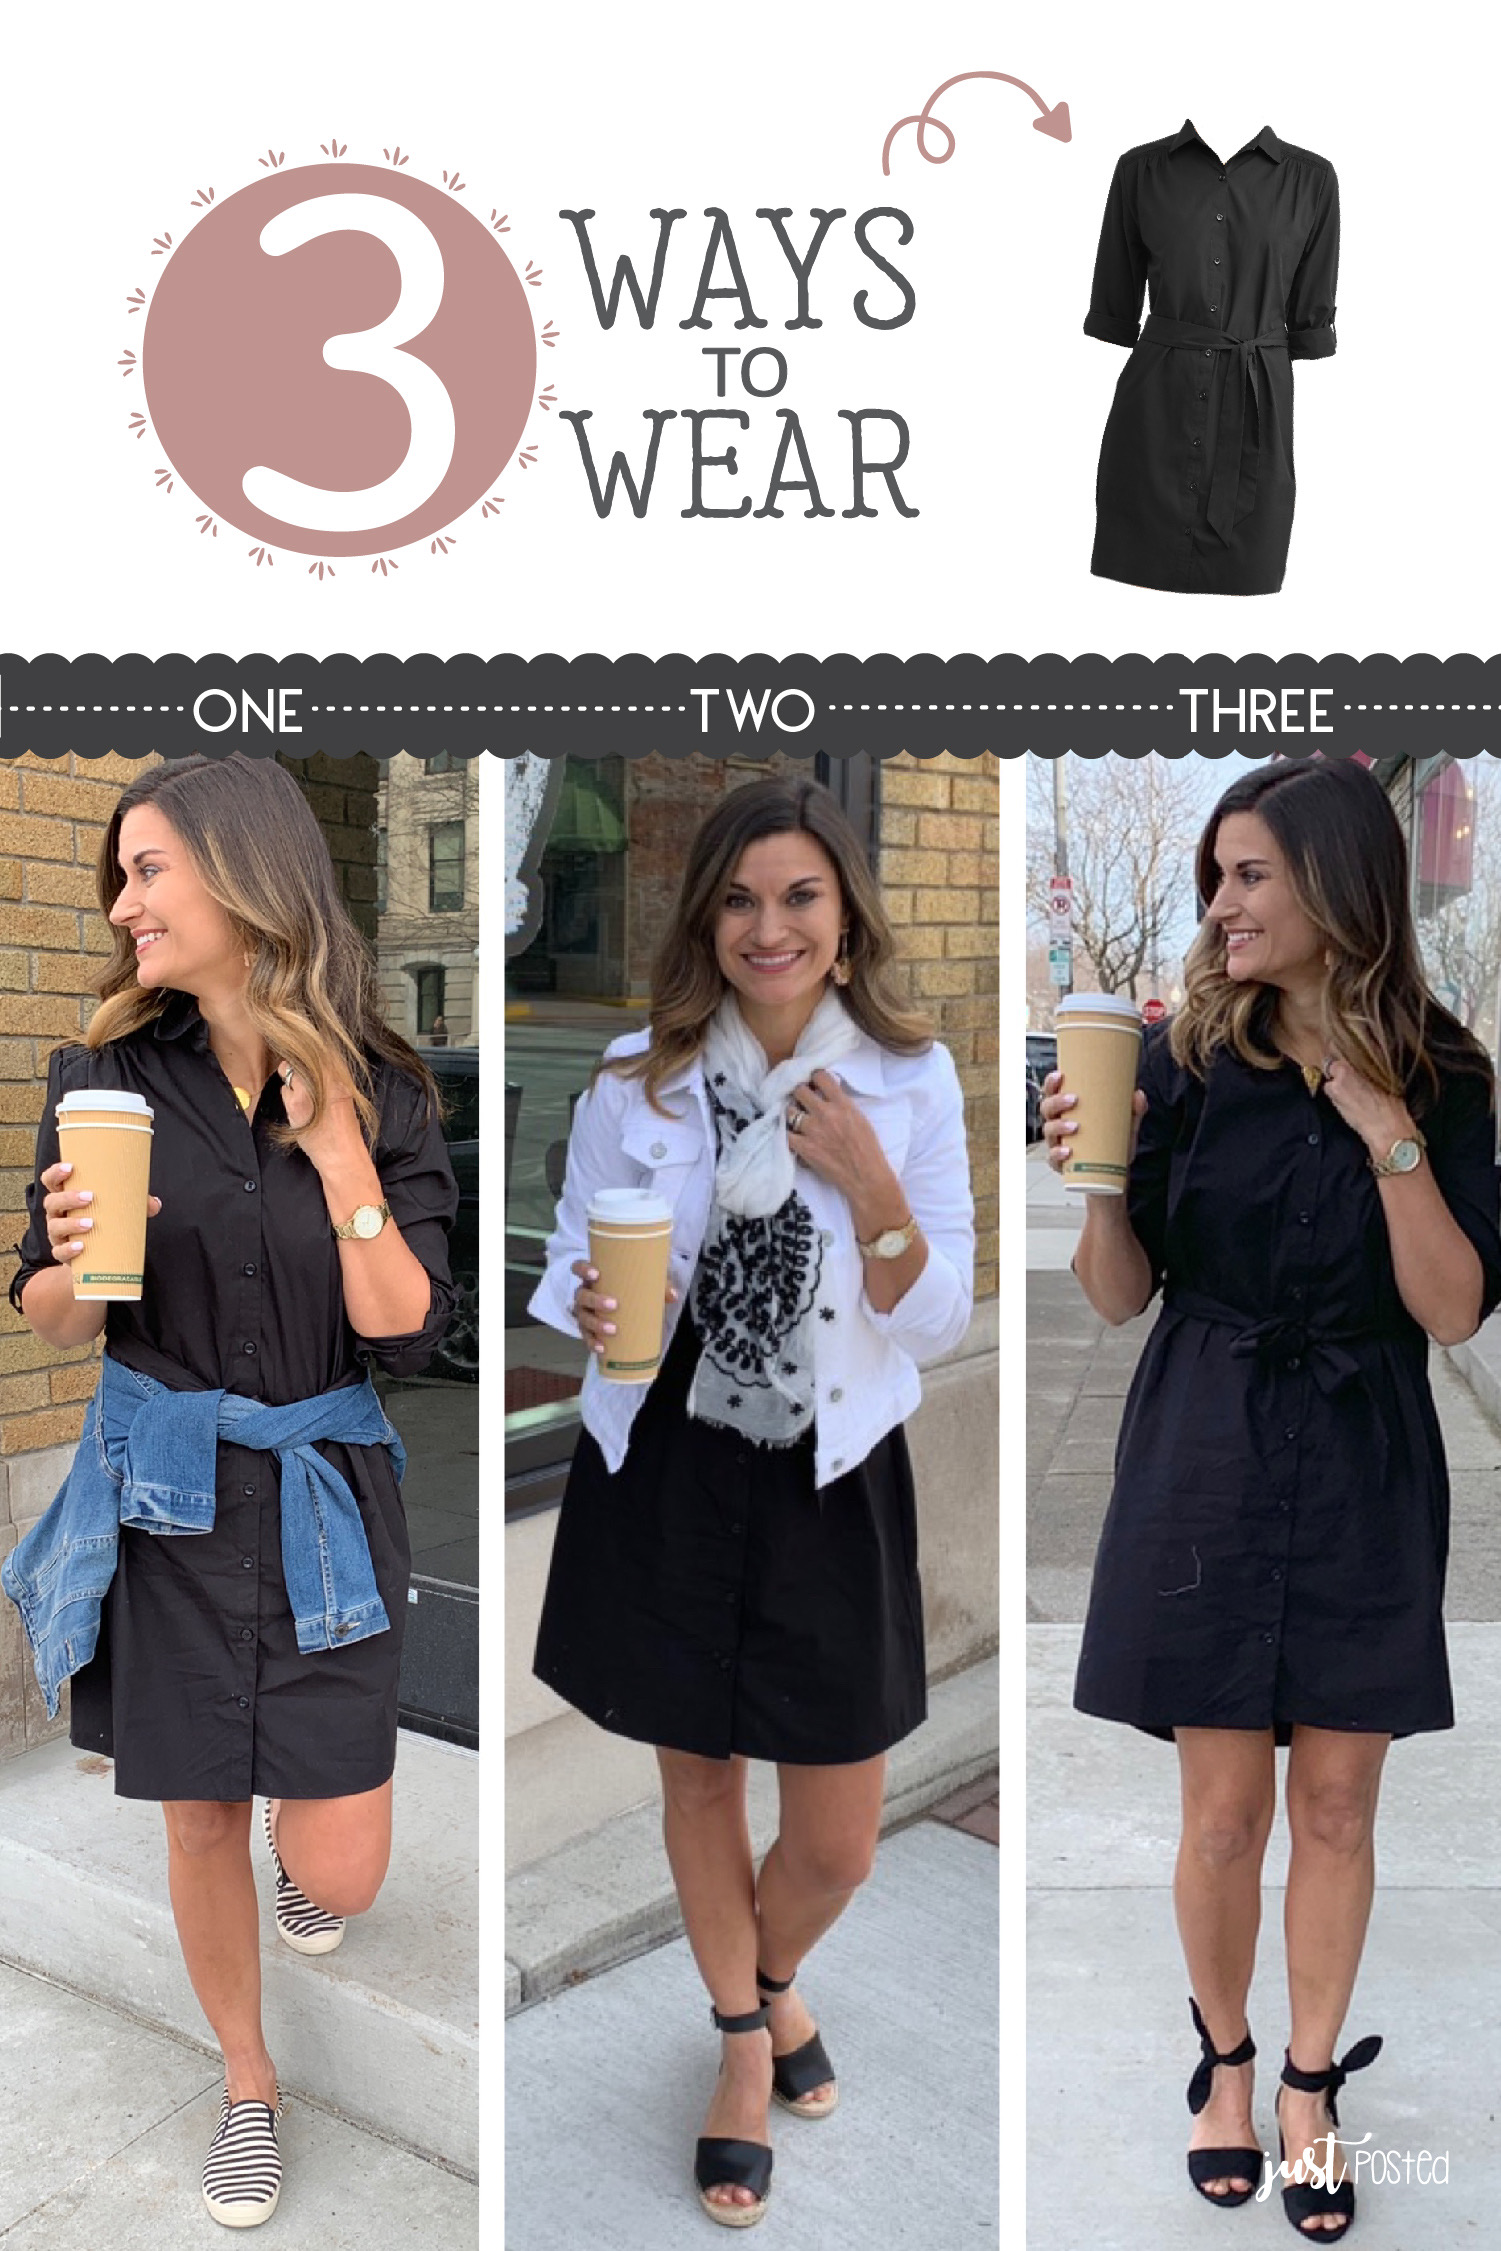 How to Style an All Black Outfit 3 Different Ways, fashion